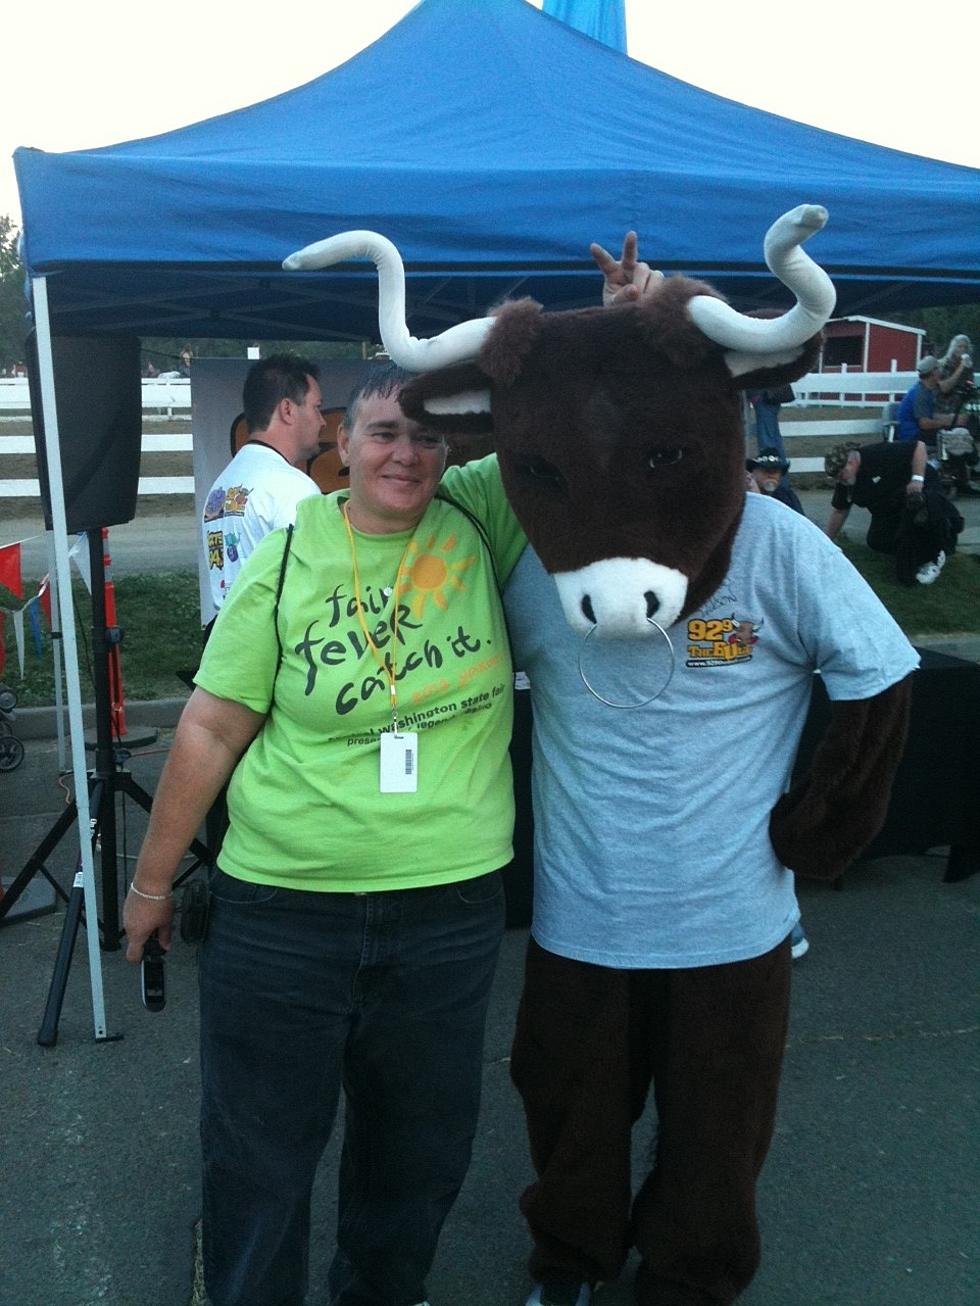 Stop by the 92.9 the Bull Tent Near the Budweiser Stage Tonight at the Fair